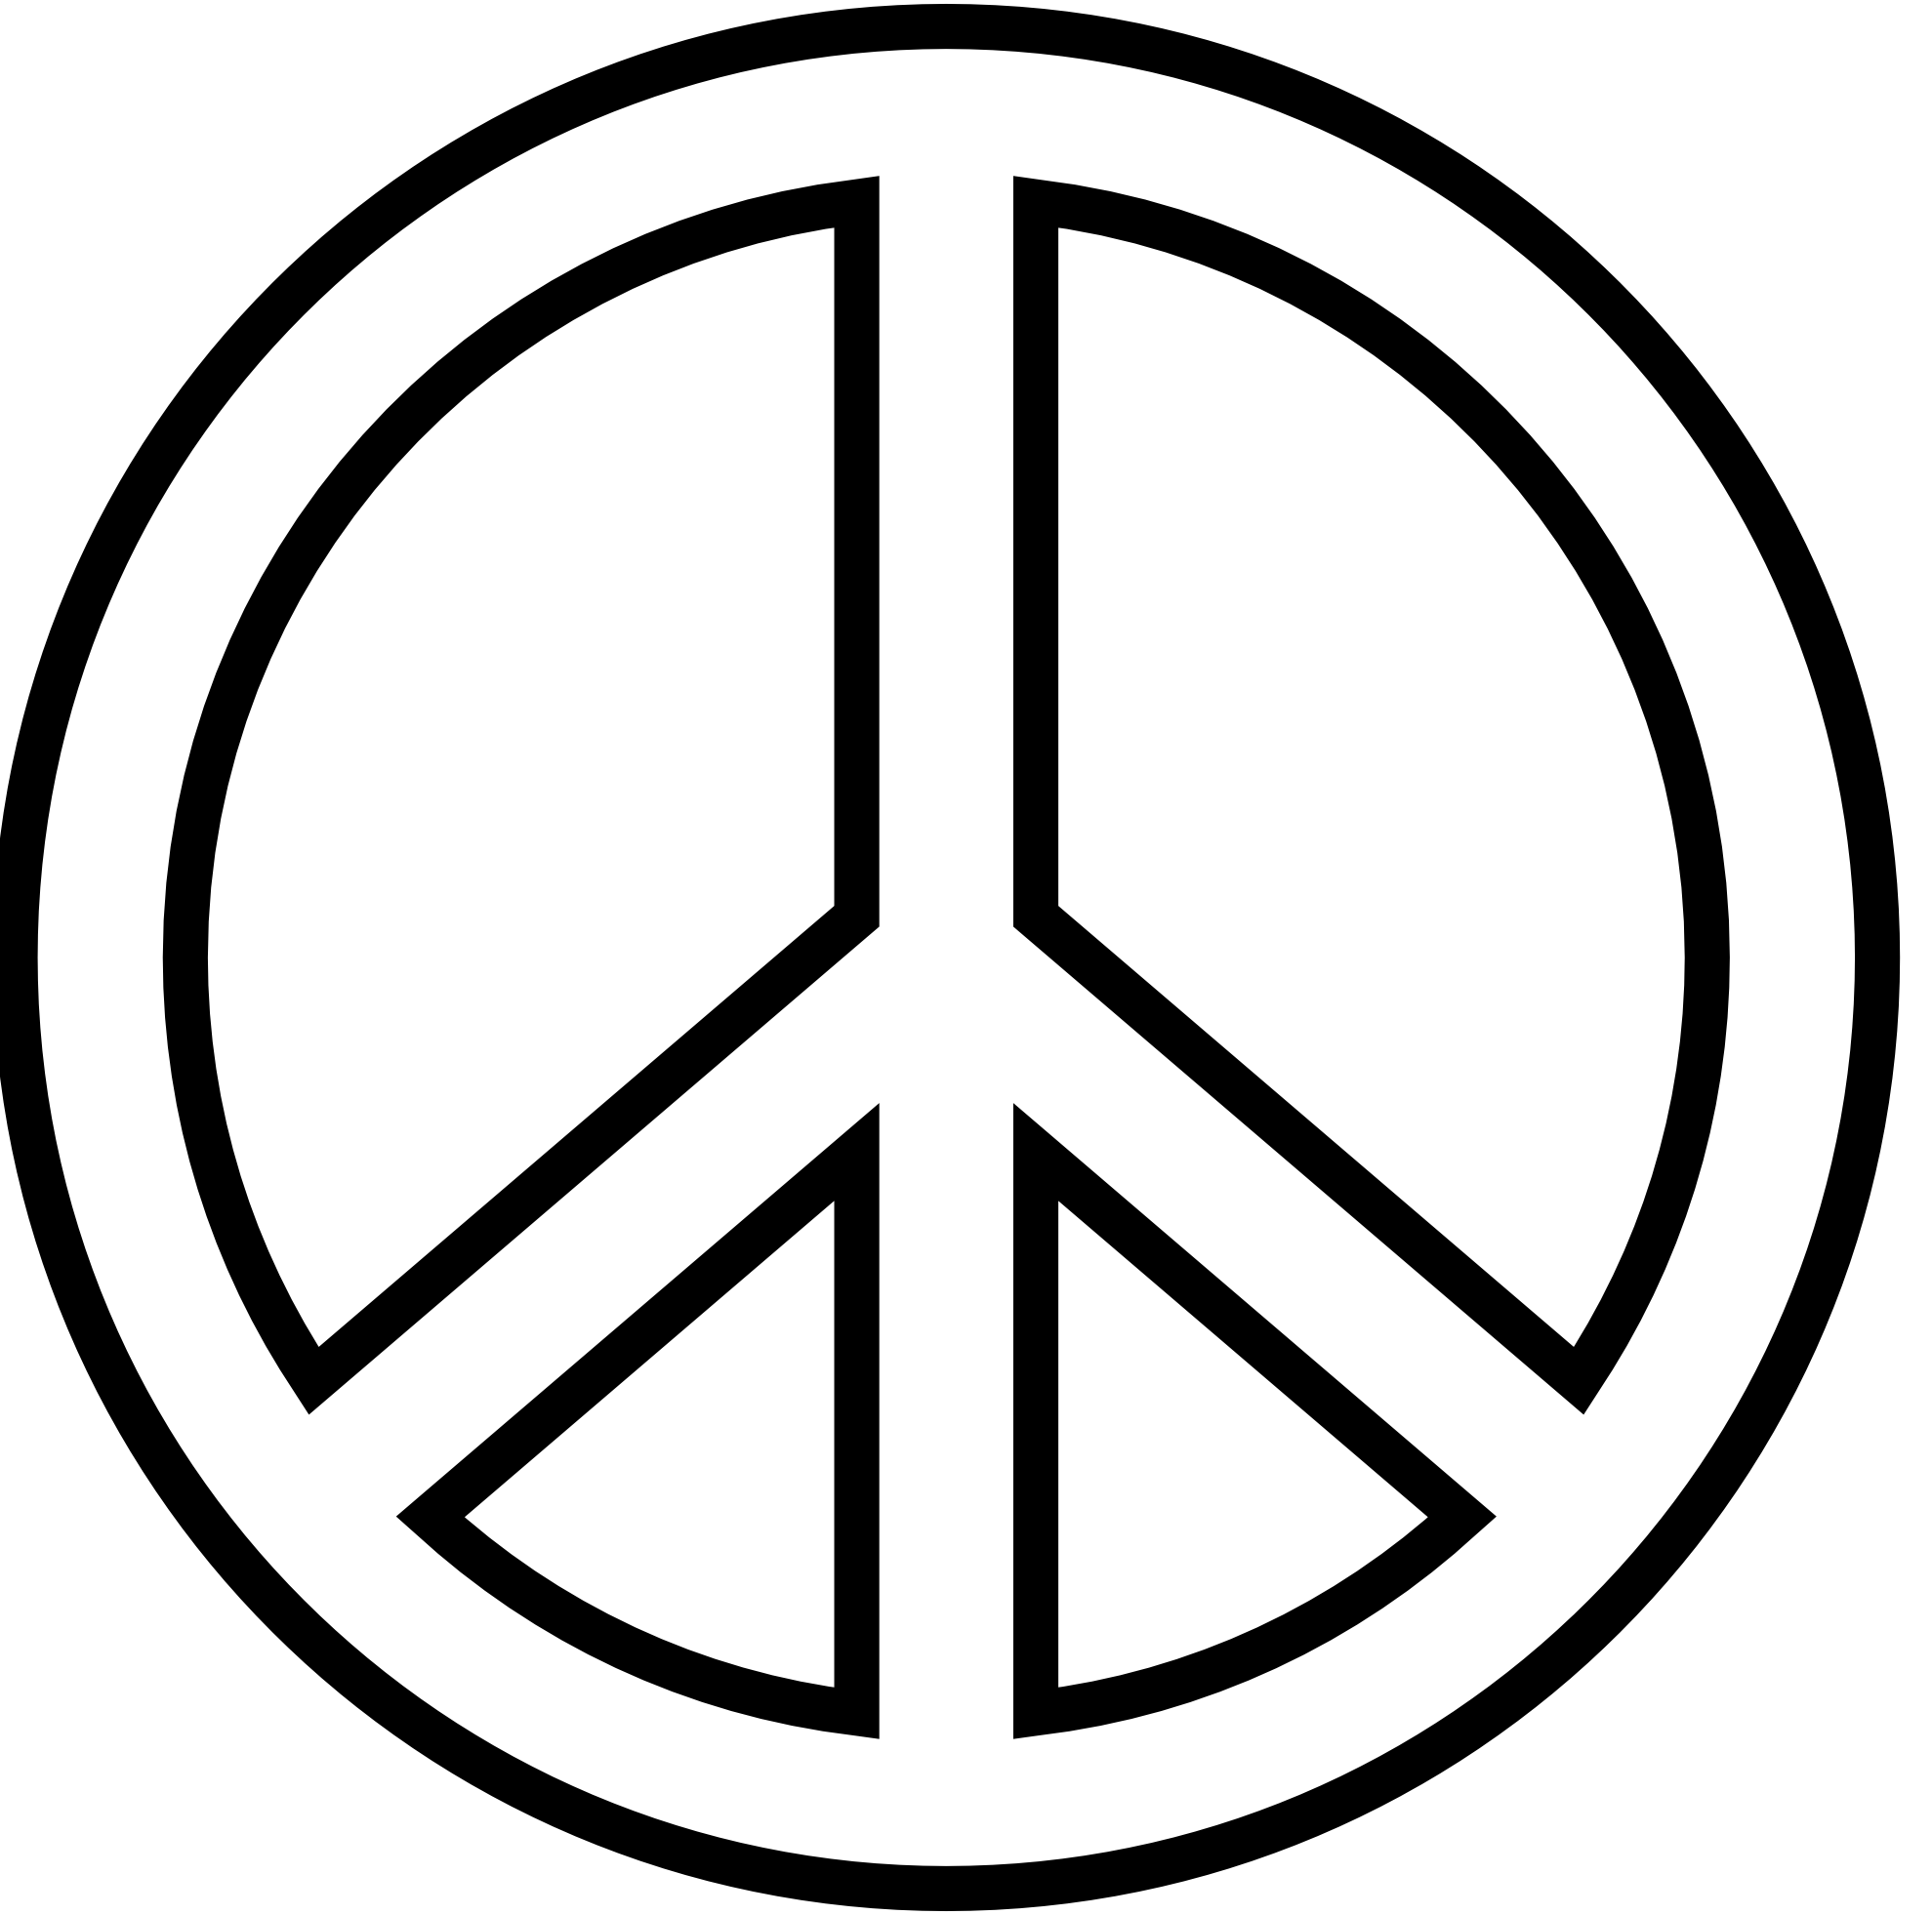 Peace sign images free clip art 3